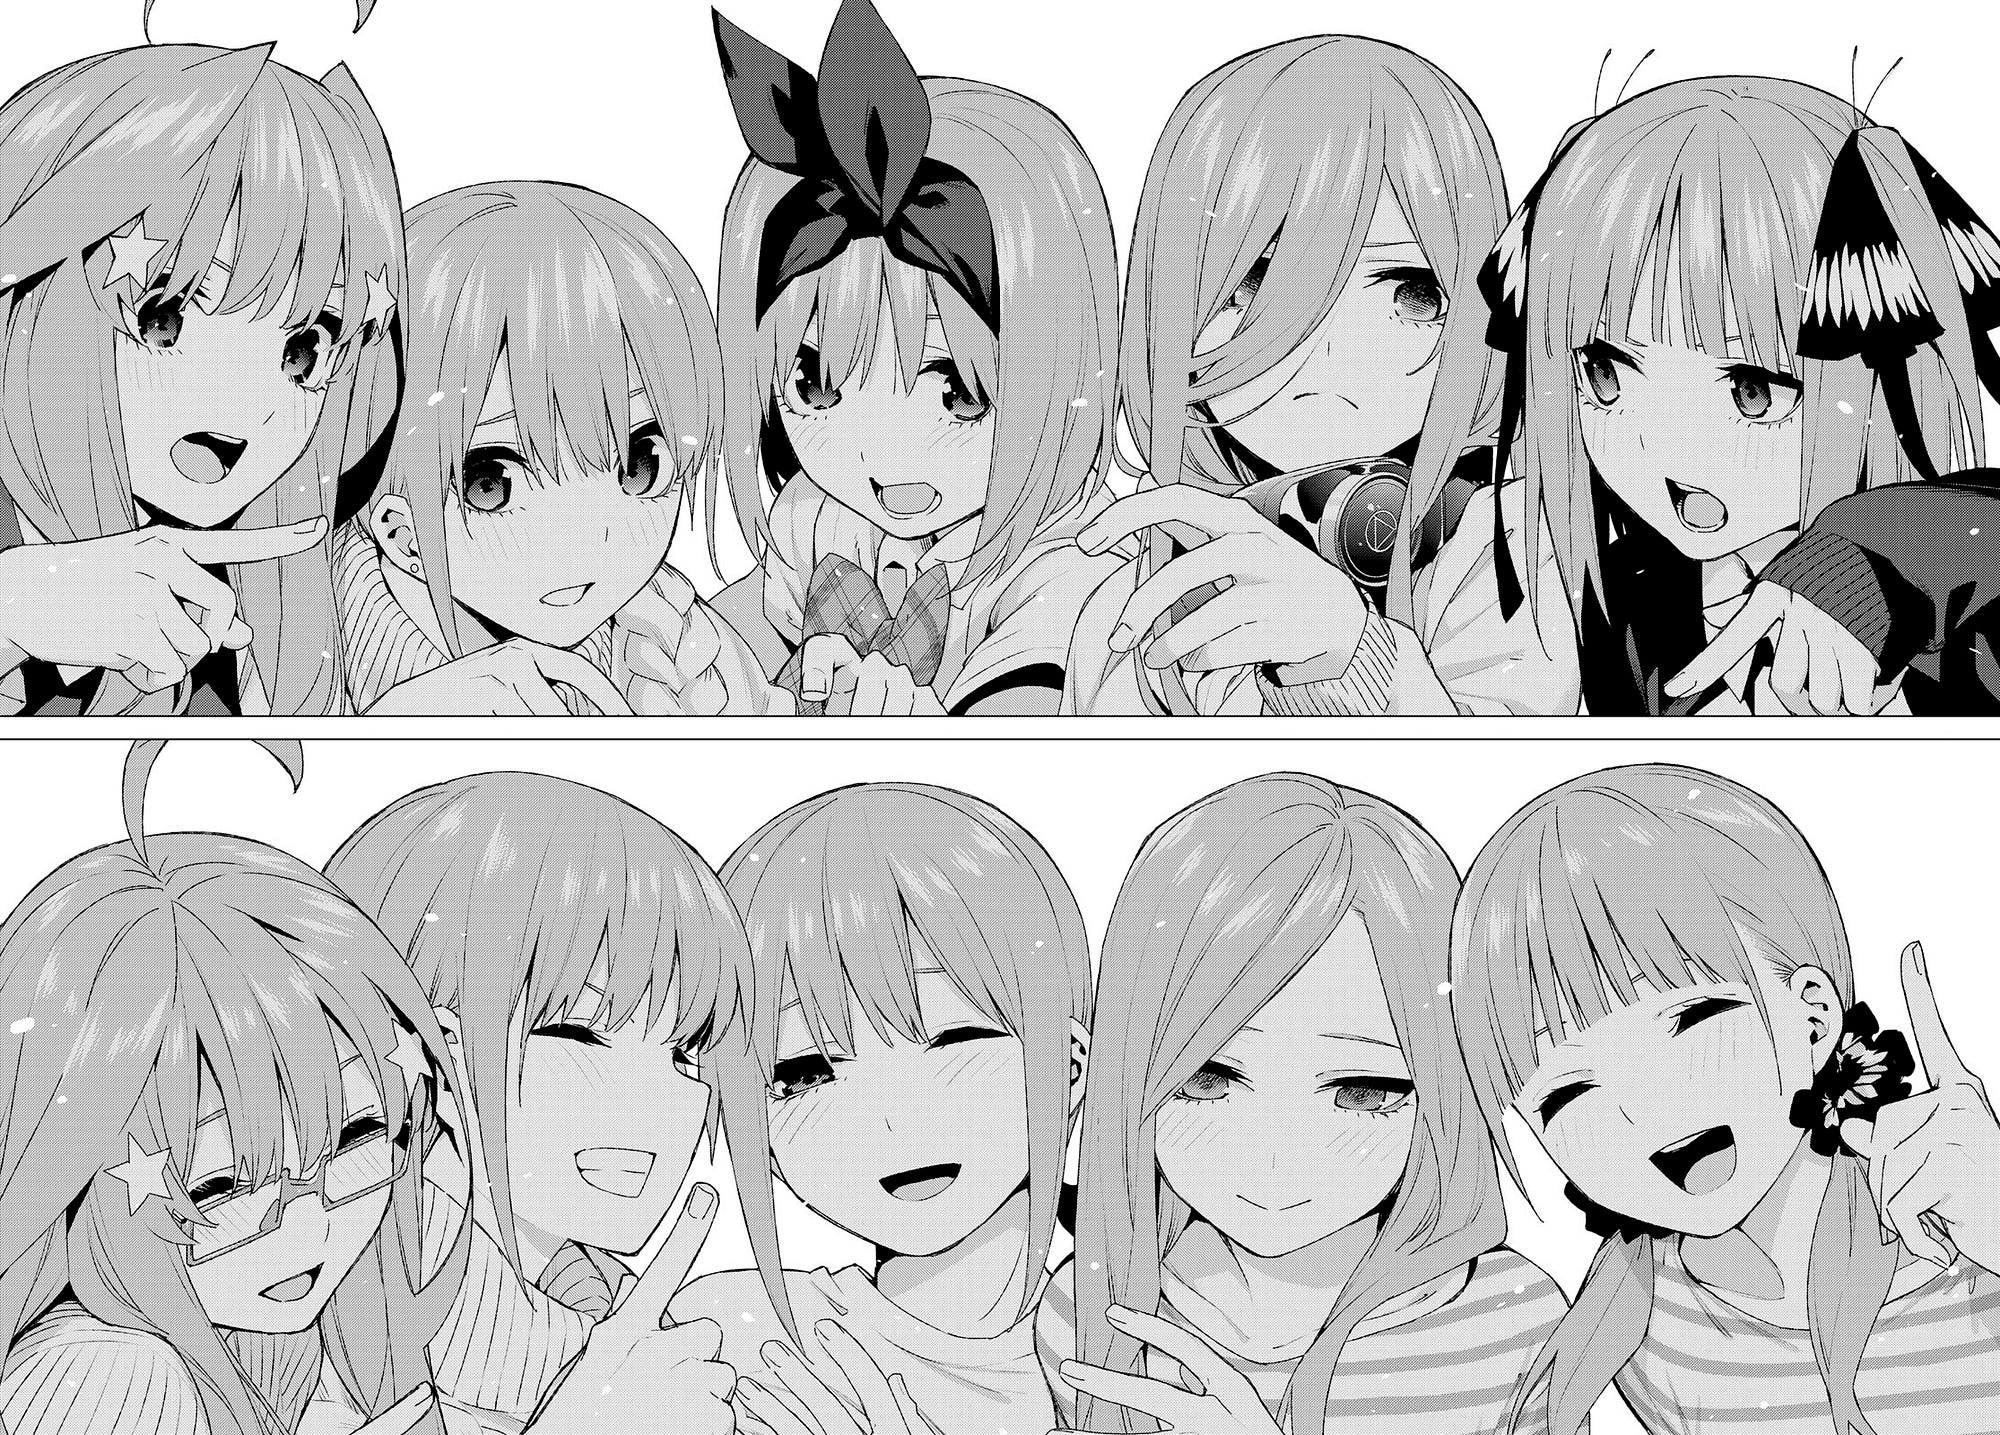 Genre Reconstruction, Genuineness, and the Paradox of Change in The  Quintessential Quintuplets, by Reid Braaten - TheMamaLuigi, AniTAY-Official